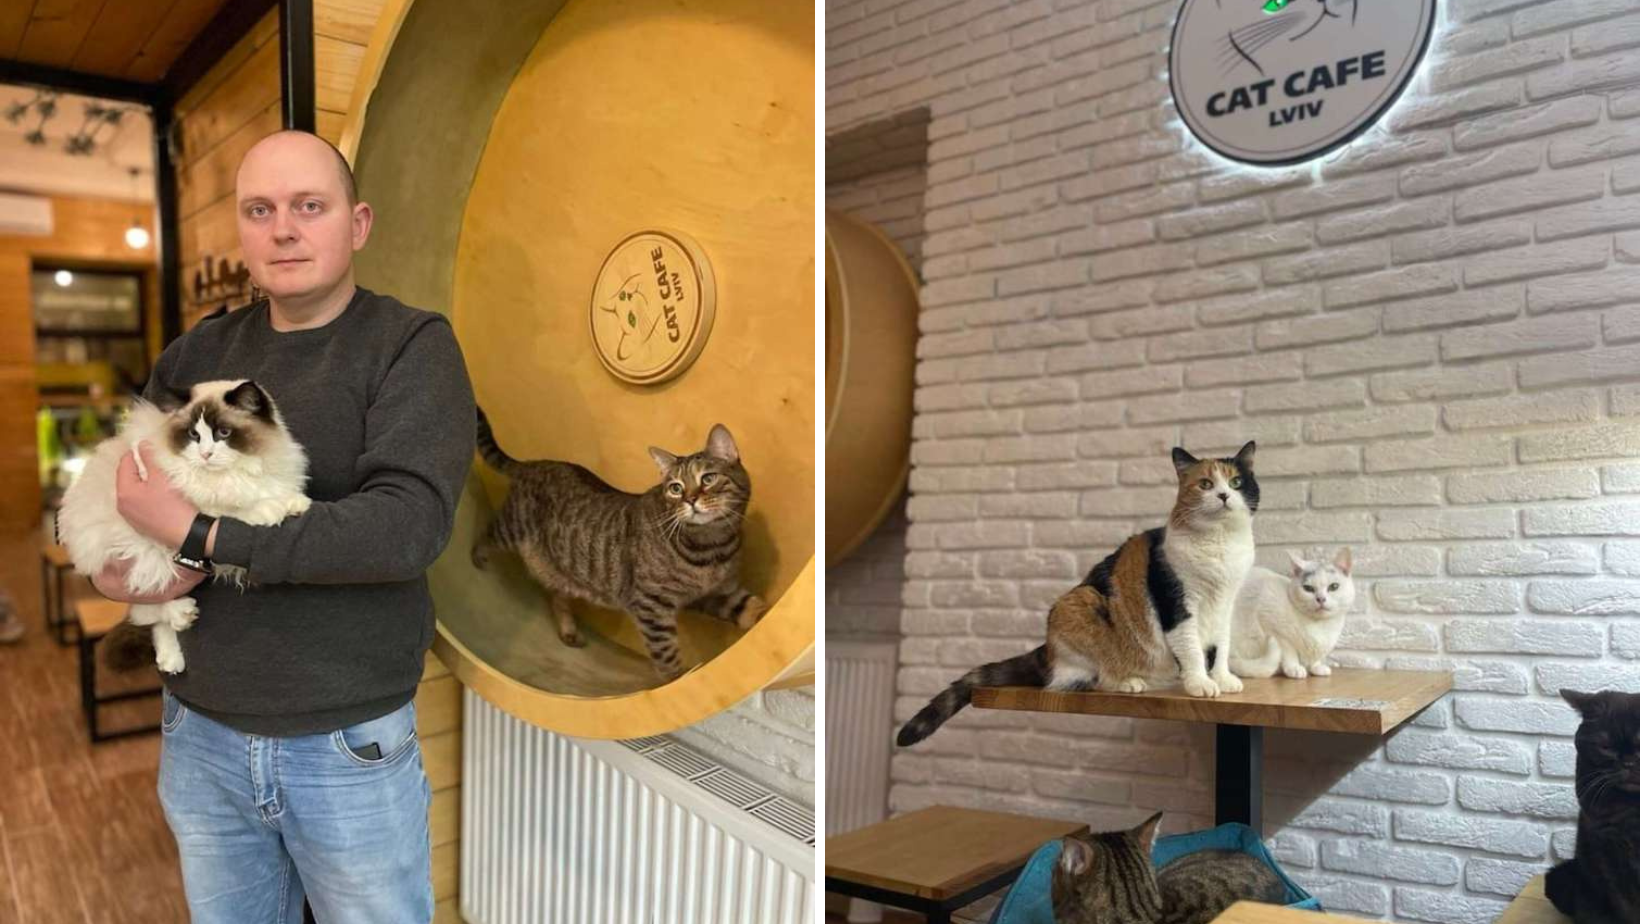 A Cat Café In Ukraine Stays Open During The War To Take Care Of 20 Kitties